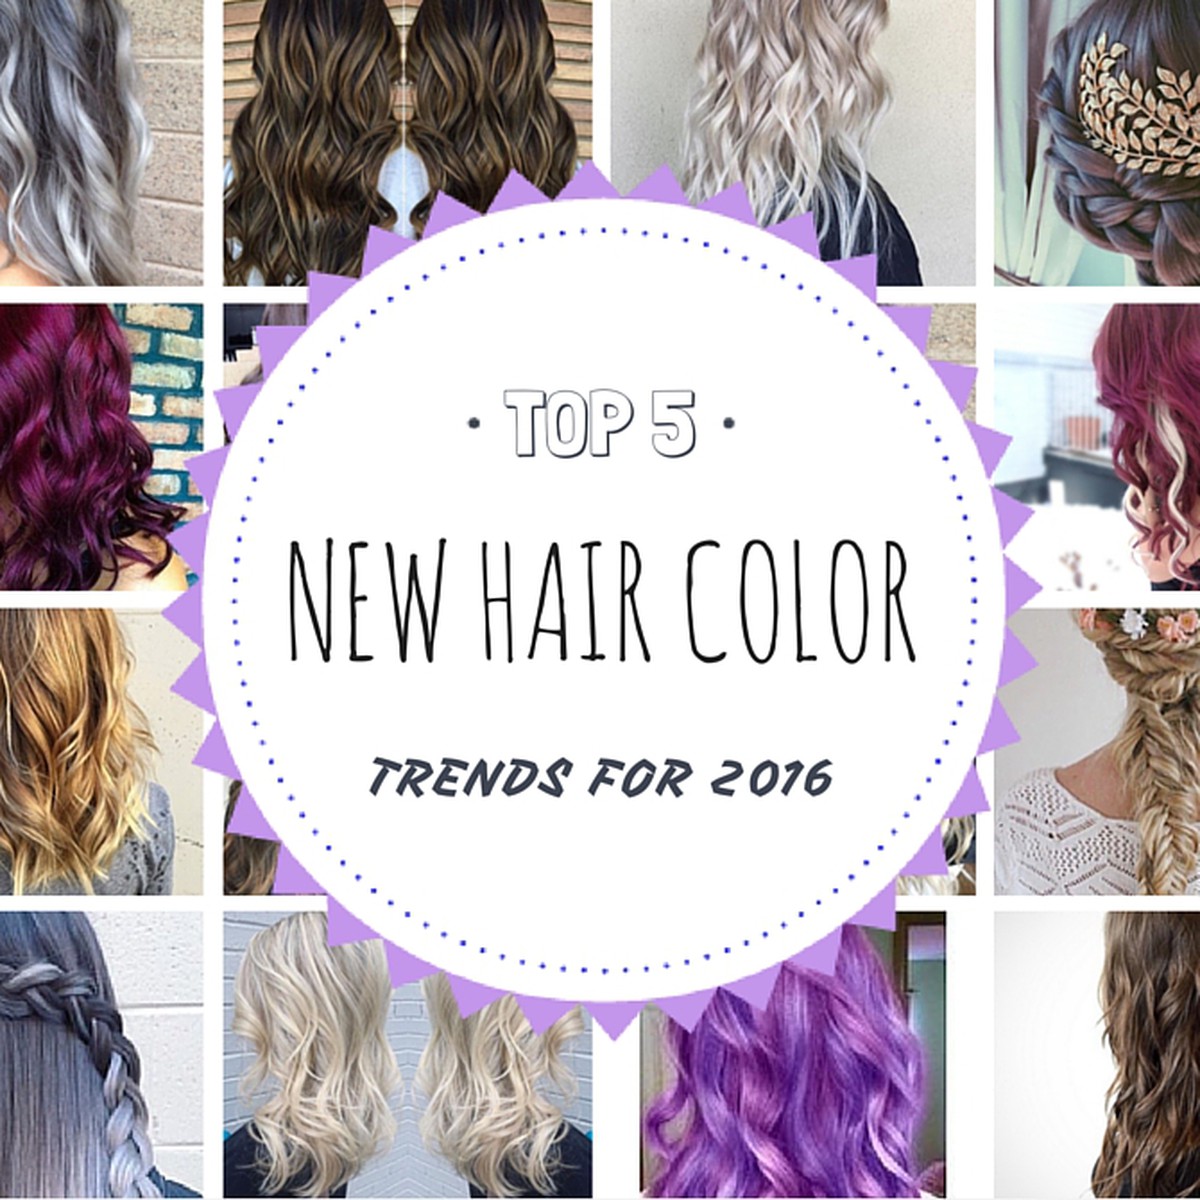 Top 5 New Hair Color Trends for 2016 | Siam2nite